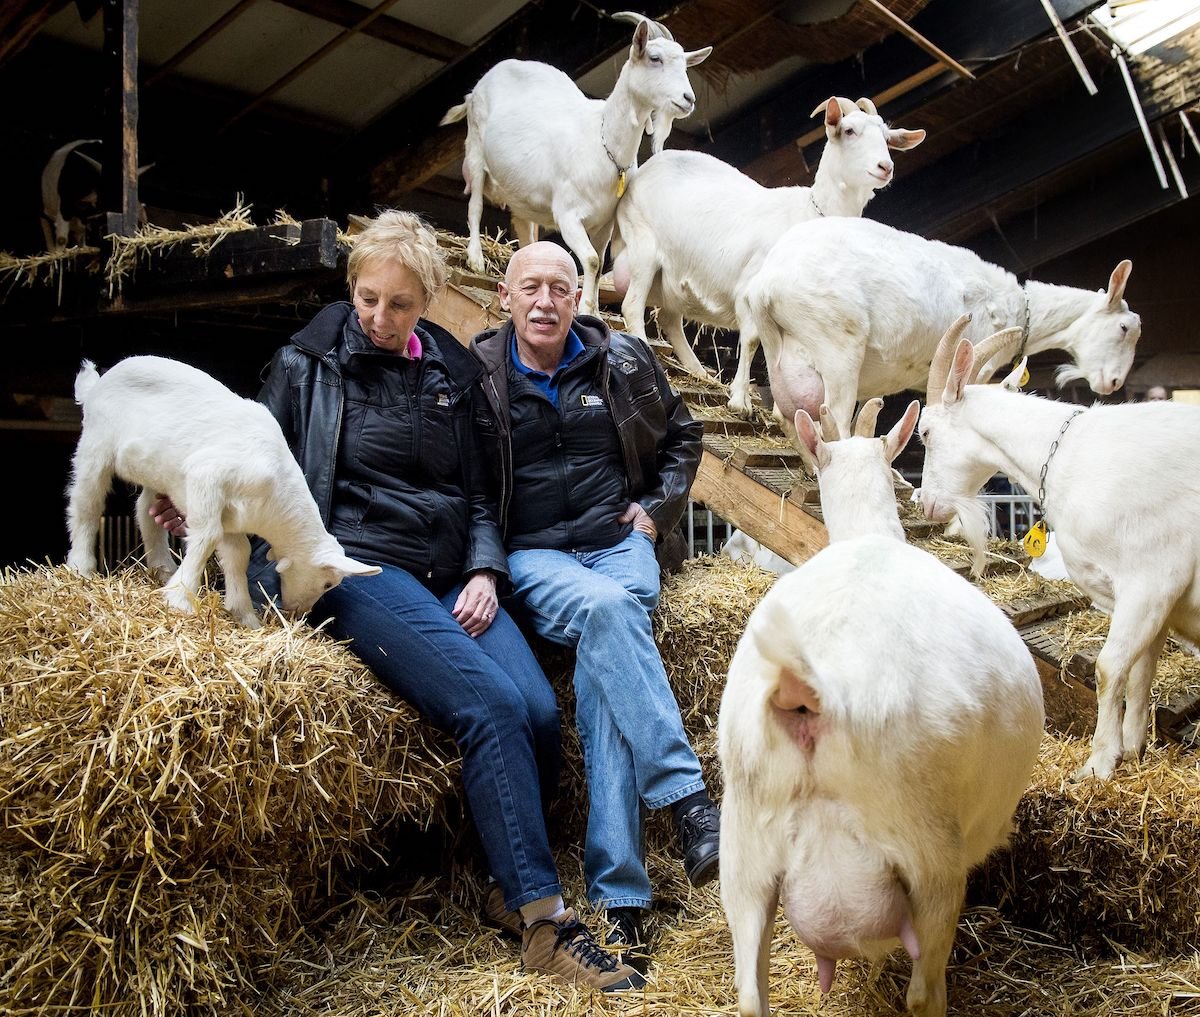 'The Incredible Dr. Pol' star Dr. Jan Pol and his wife Diane at the Ridammerhoeve goat farm in Amsterdam on February 17, 2016